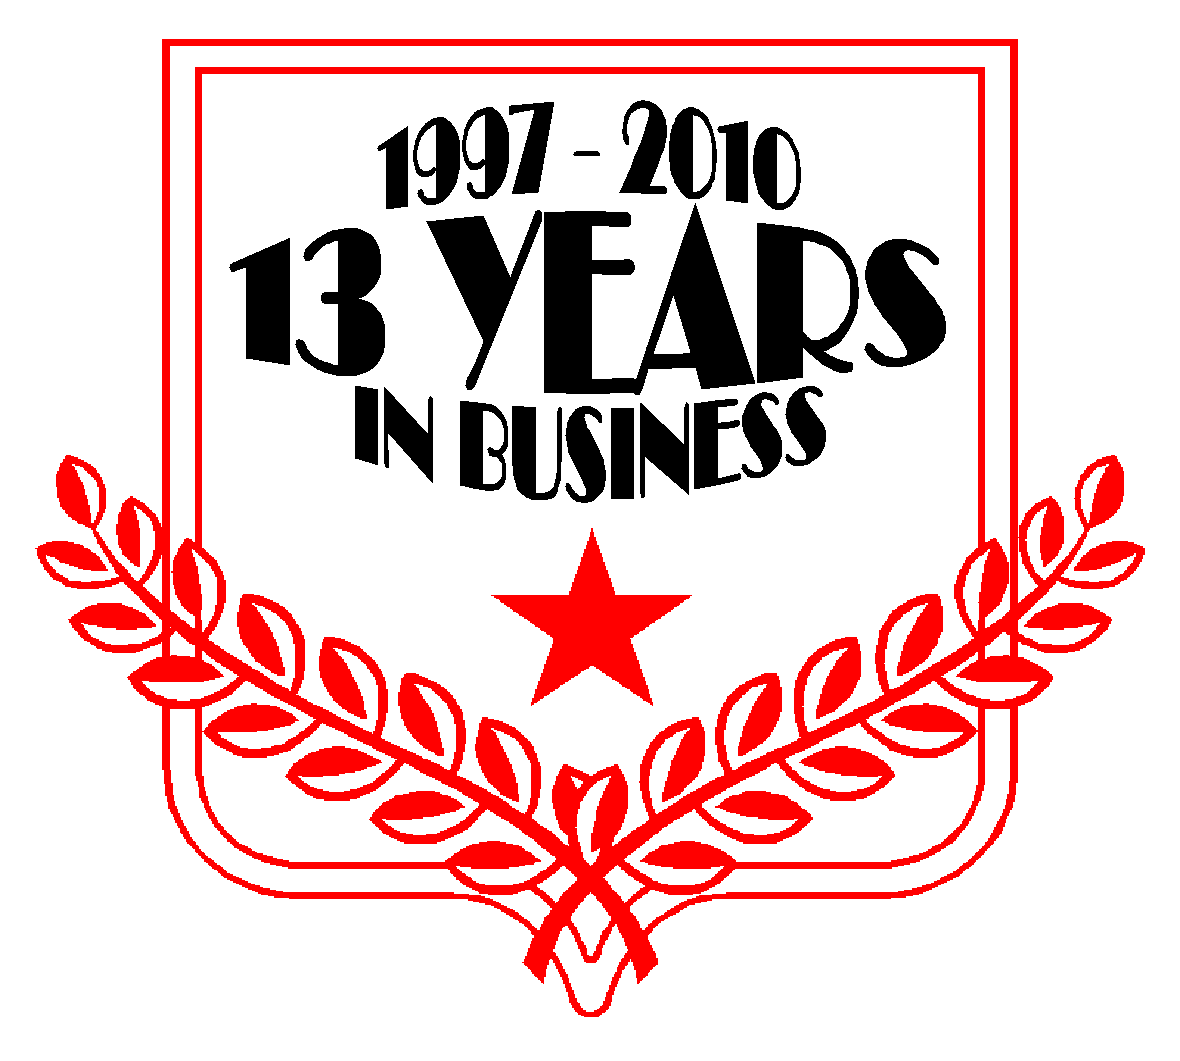 Years in Business